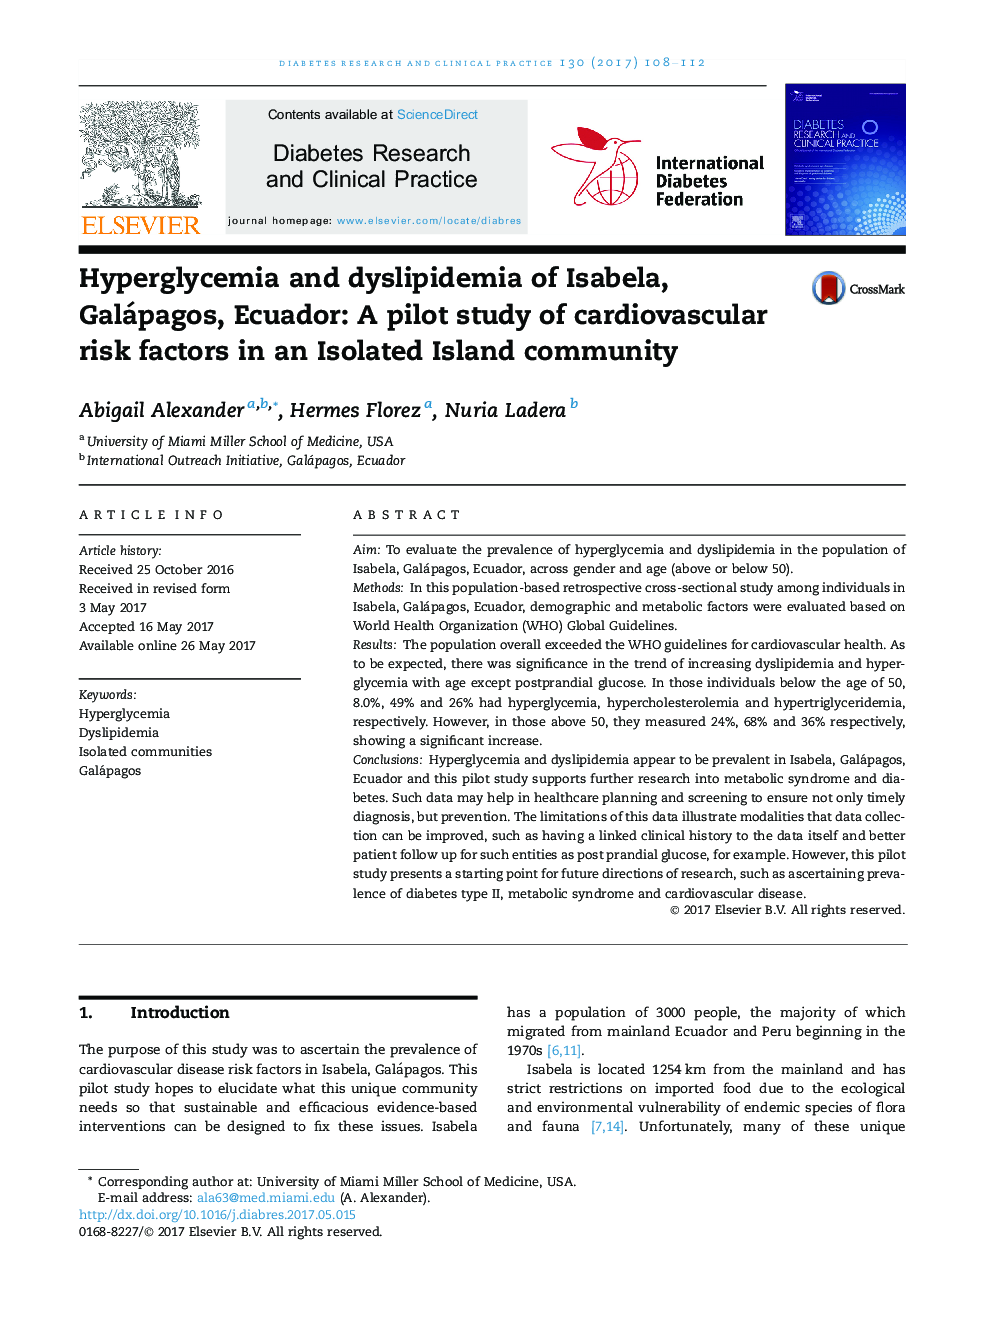 Hyperglycemia and dyslipidemia of Isabela, Galápagos, Ecuador: A pilot study of cardiovascular risk factors in an Isolated Island community